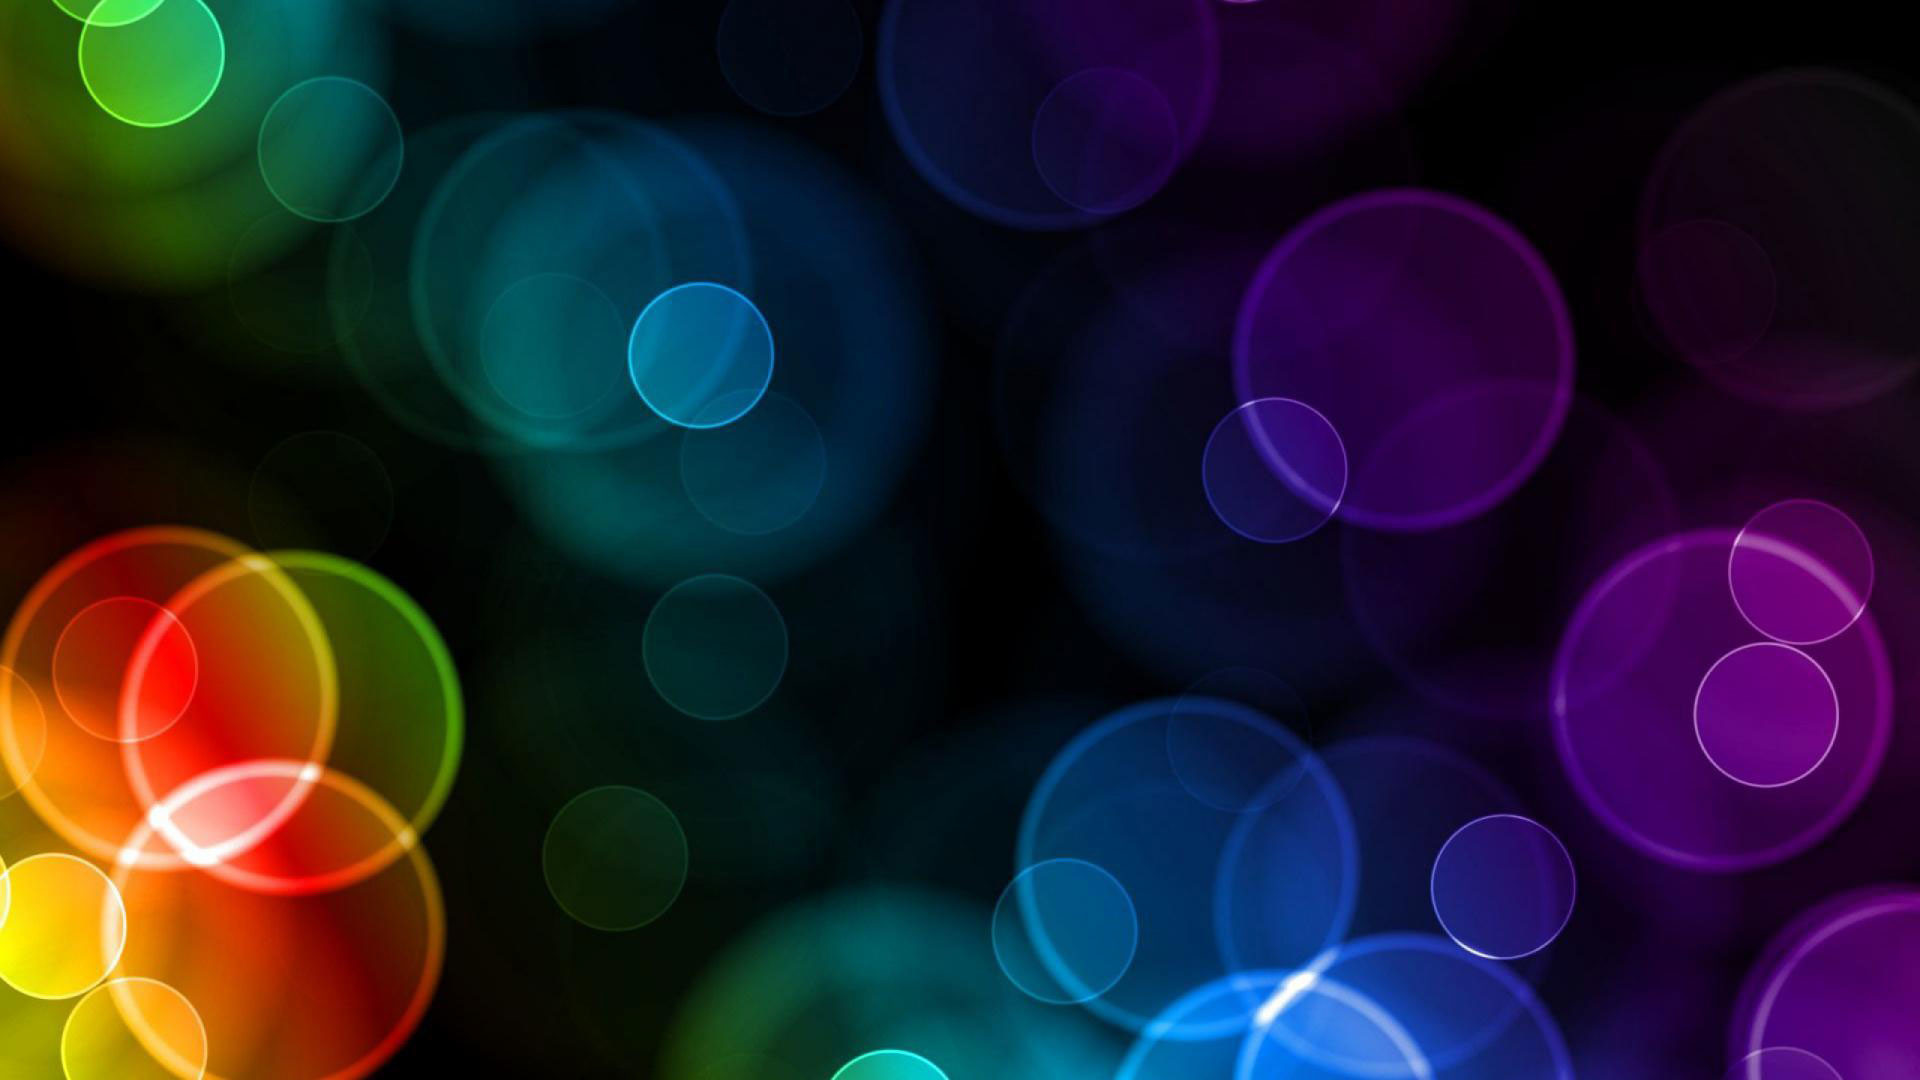 1920x1080 40 Nice Colorful Abstract Backgrounds and Tutorials Round up ...